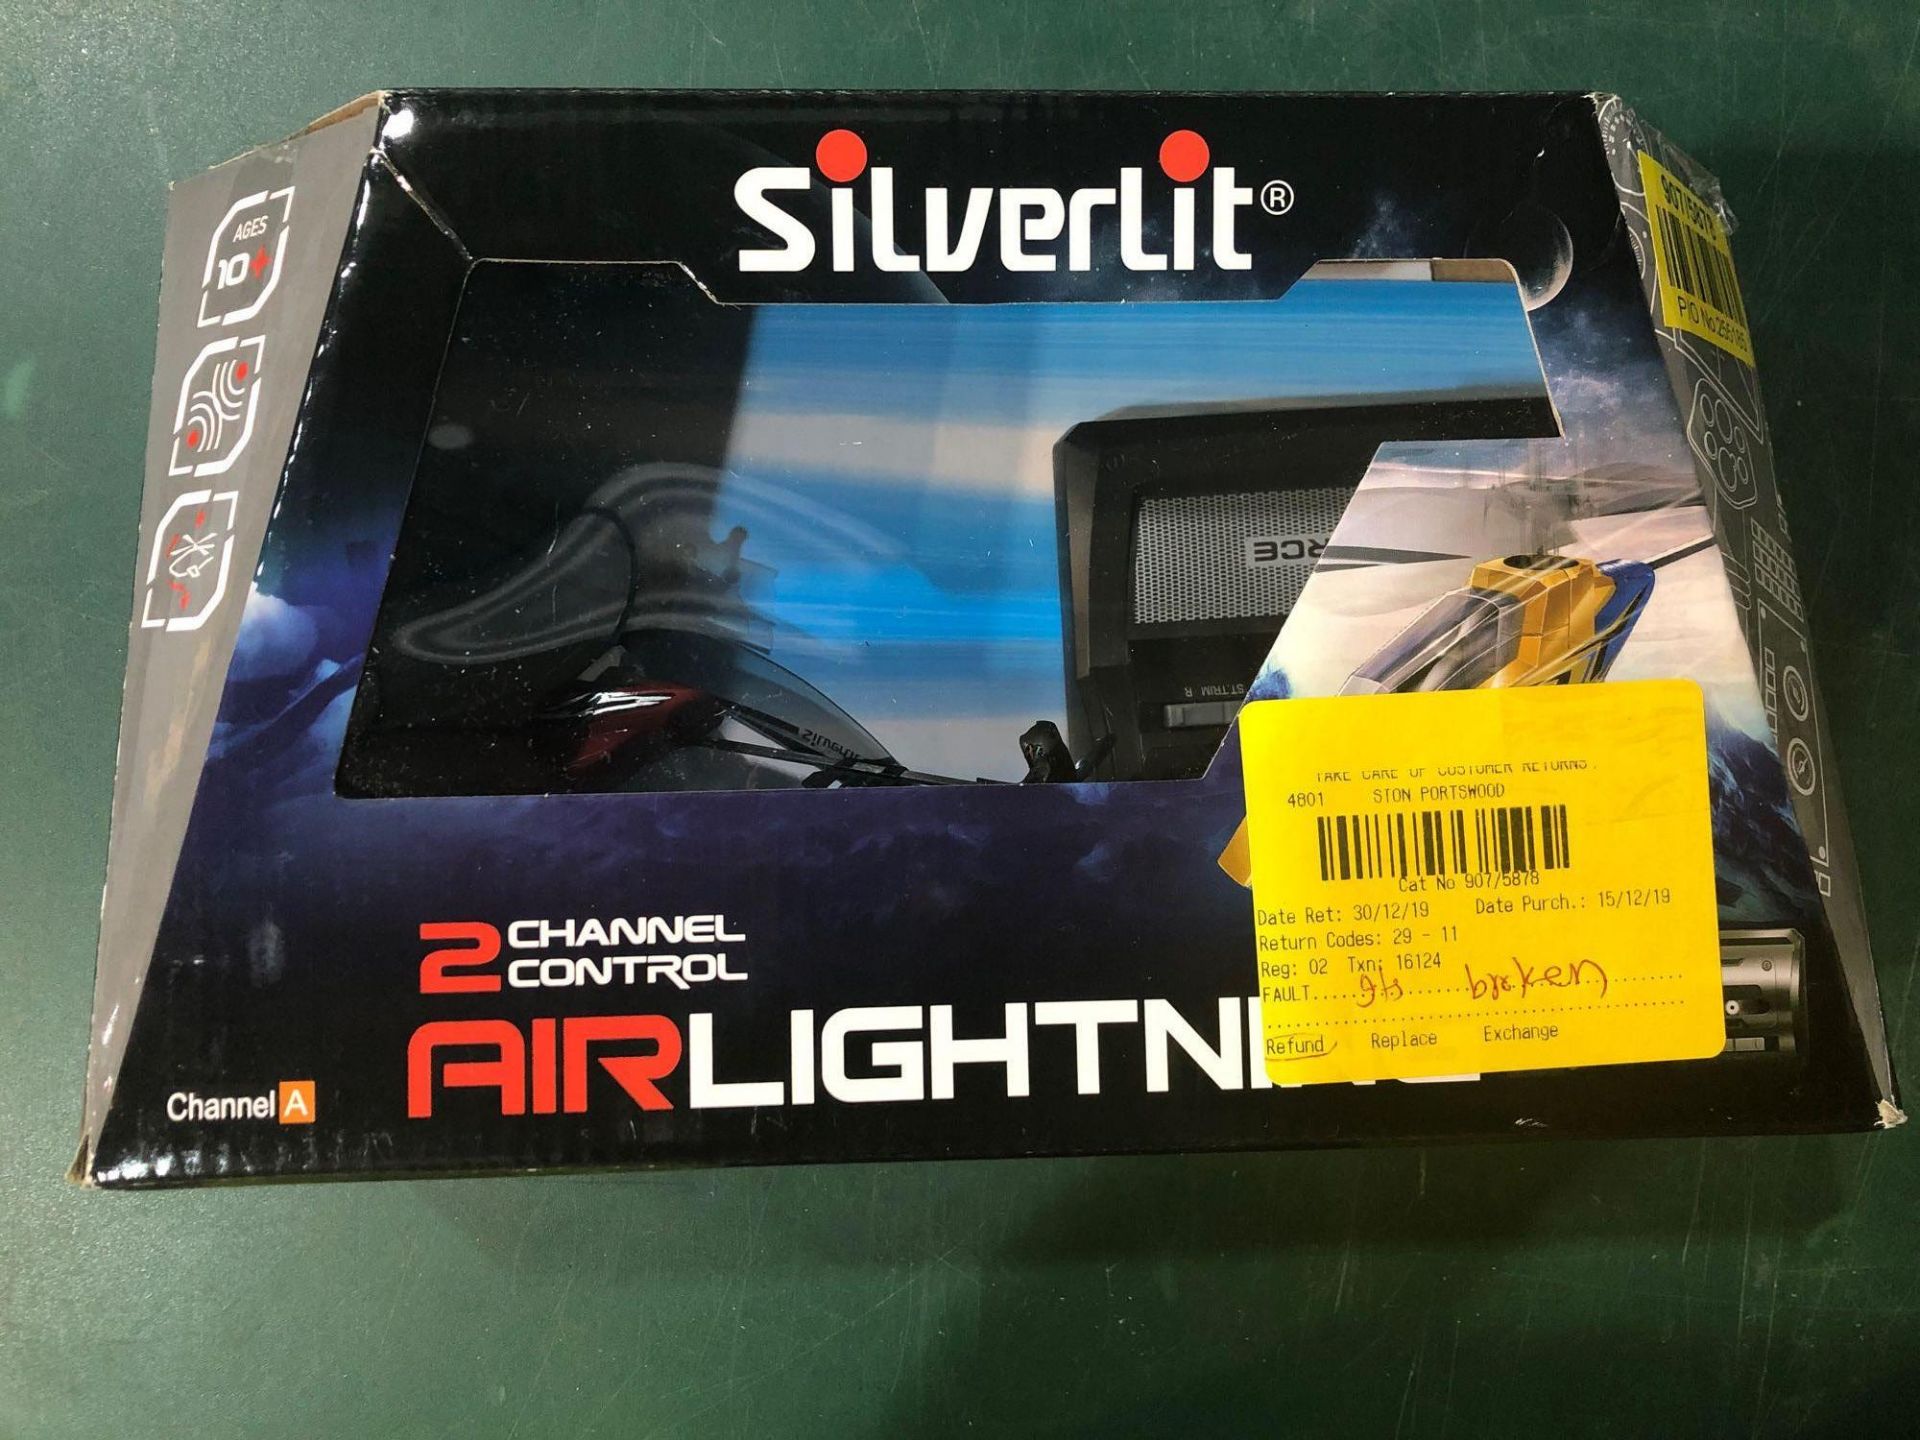 Silverlit Infrared Air Striker 16cm Radio Controlled Helicopter - £18.00 RRP - Image 2 of 4